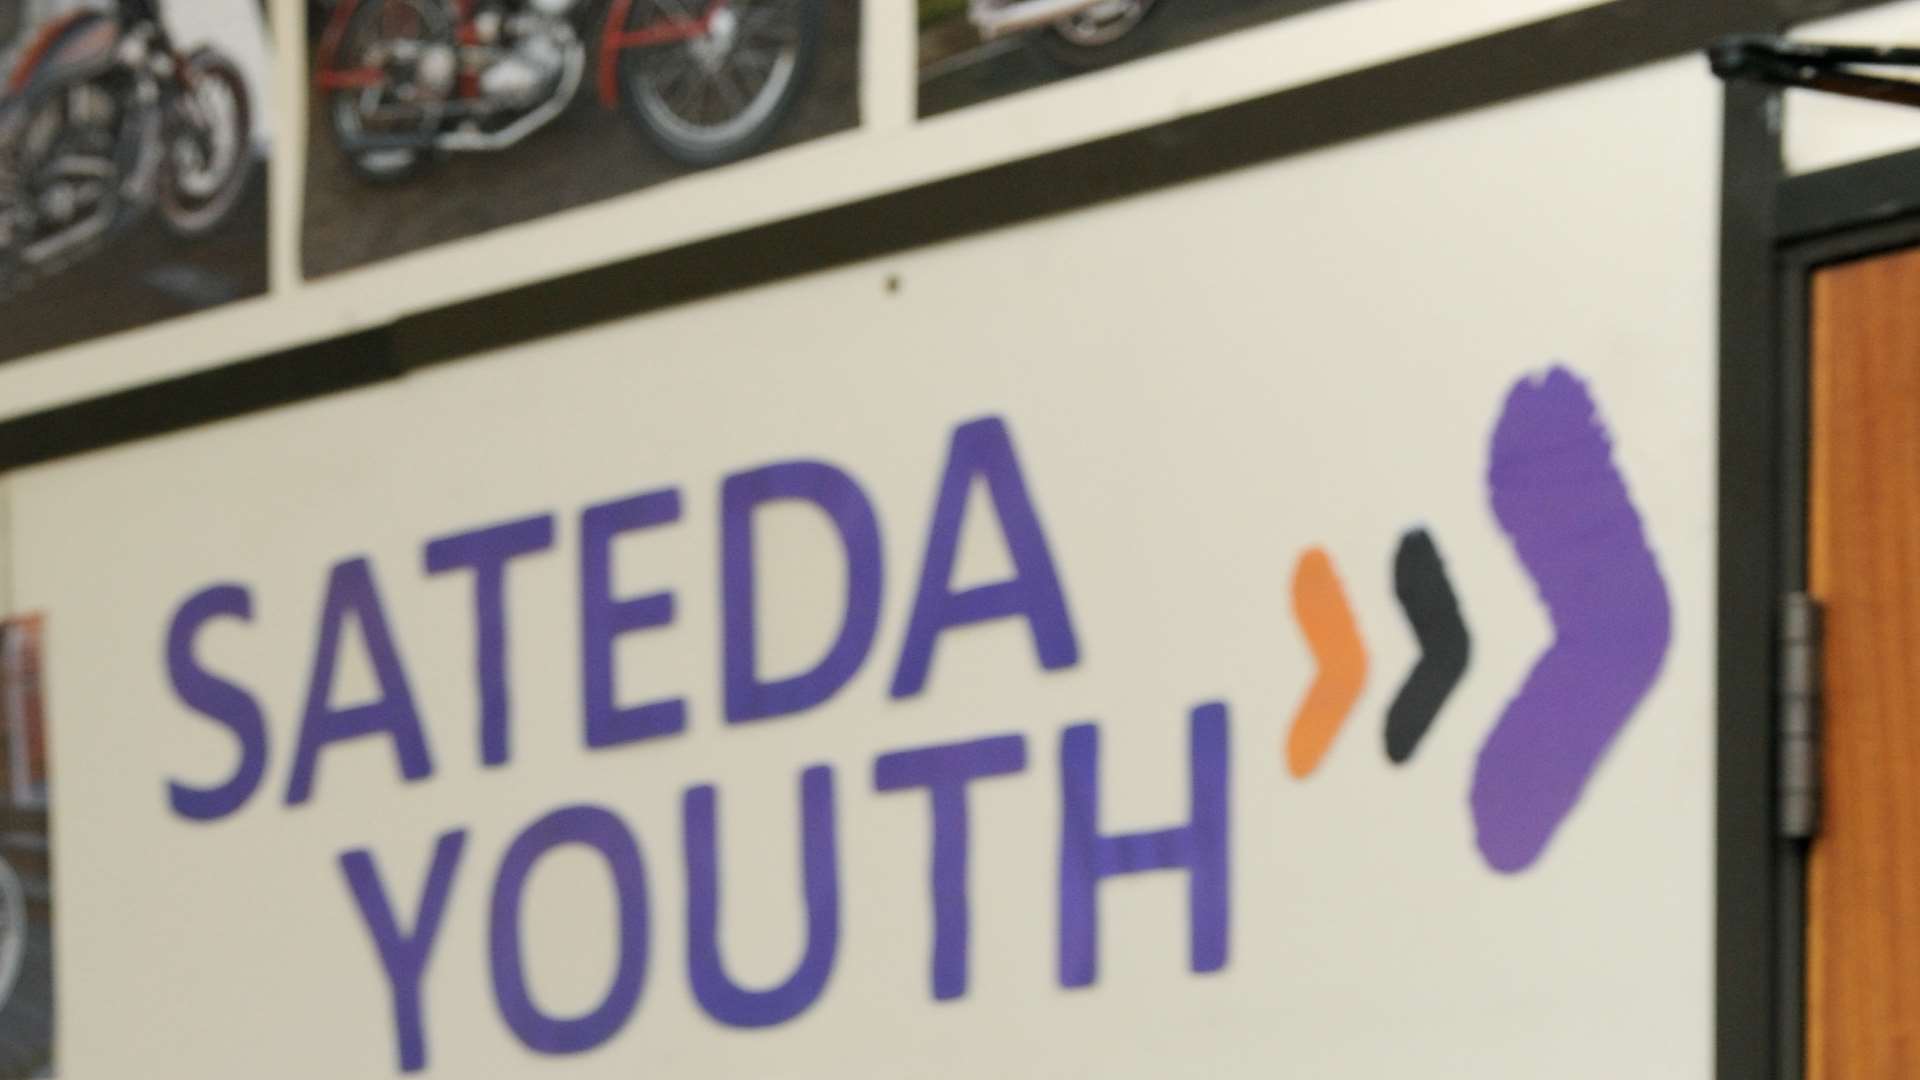 Sateda Youth is expanding its reach